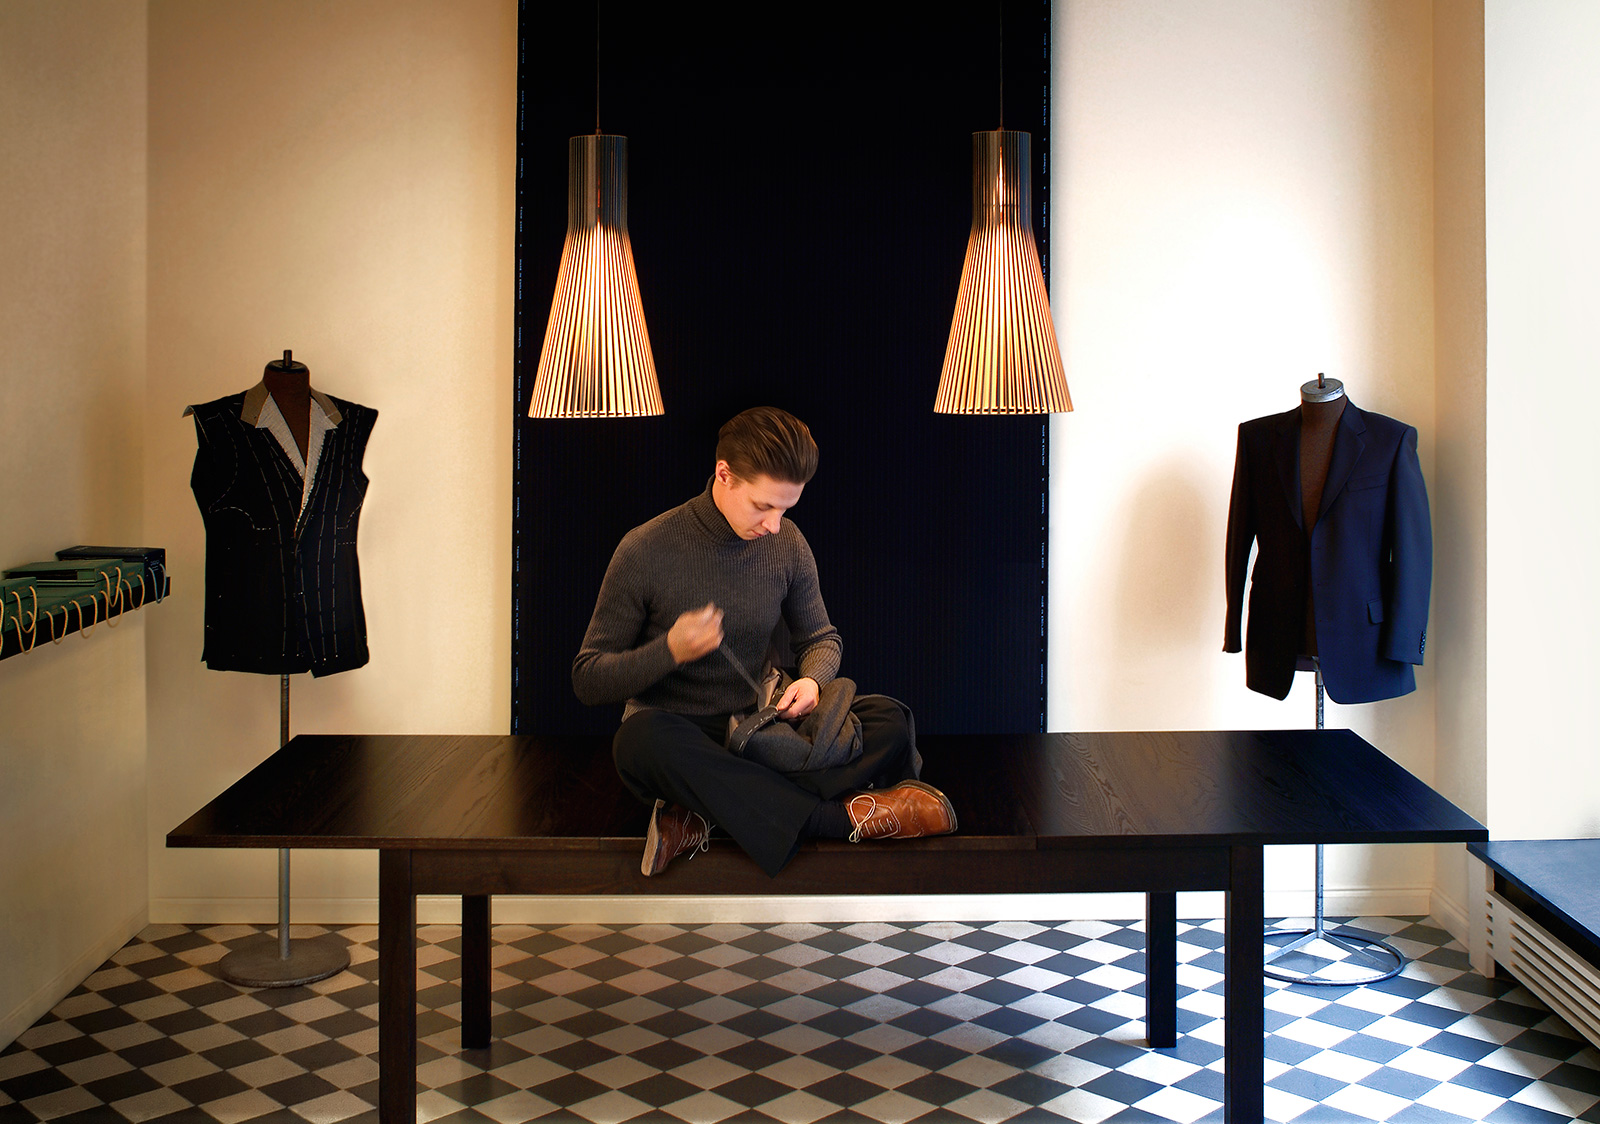 A taylor sitting on a table in a sewing room, working on a jacket. Two black Secto pendant lamps light up the room.